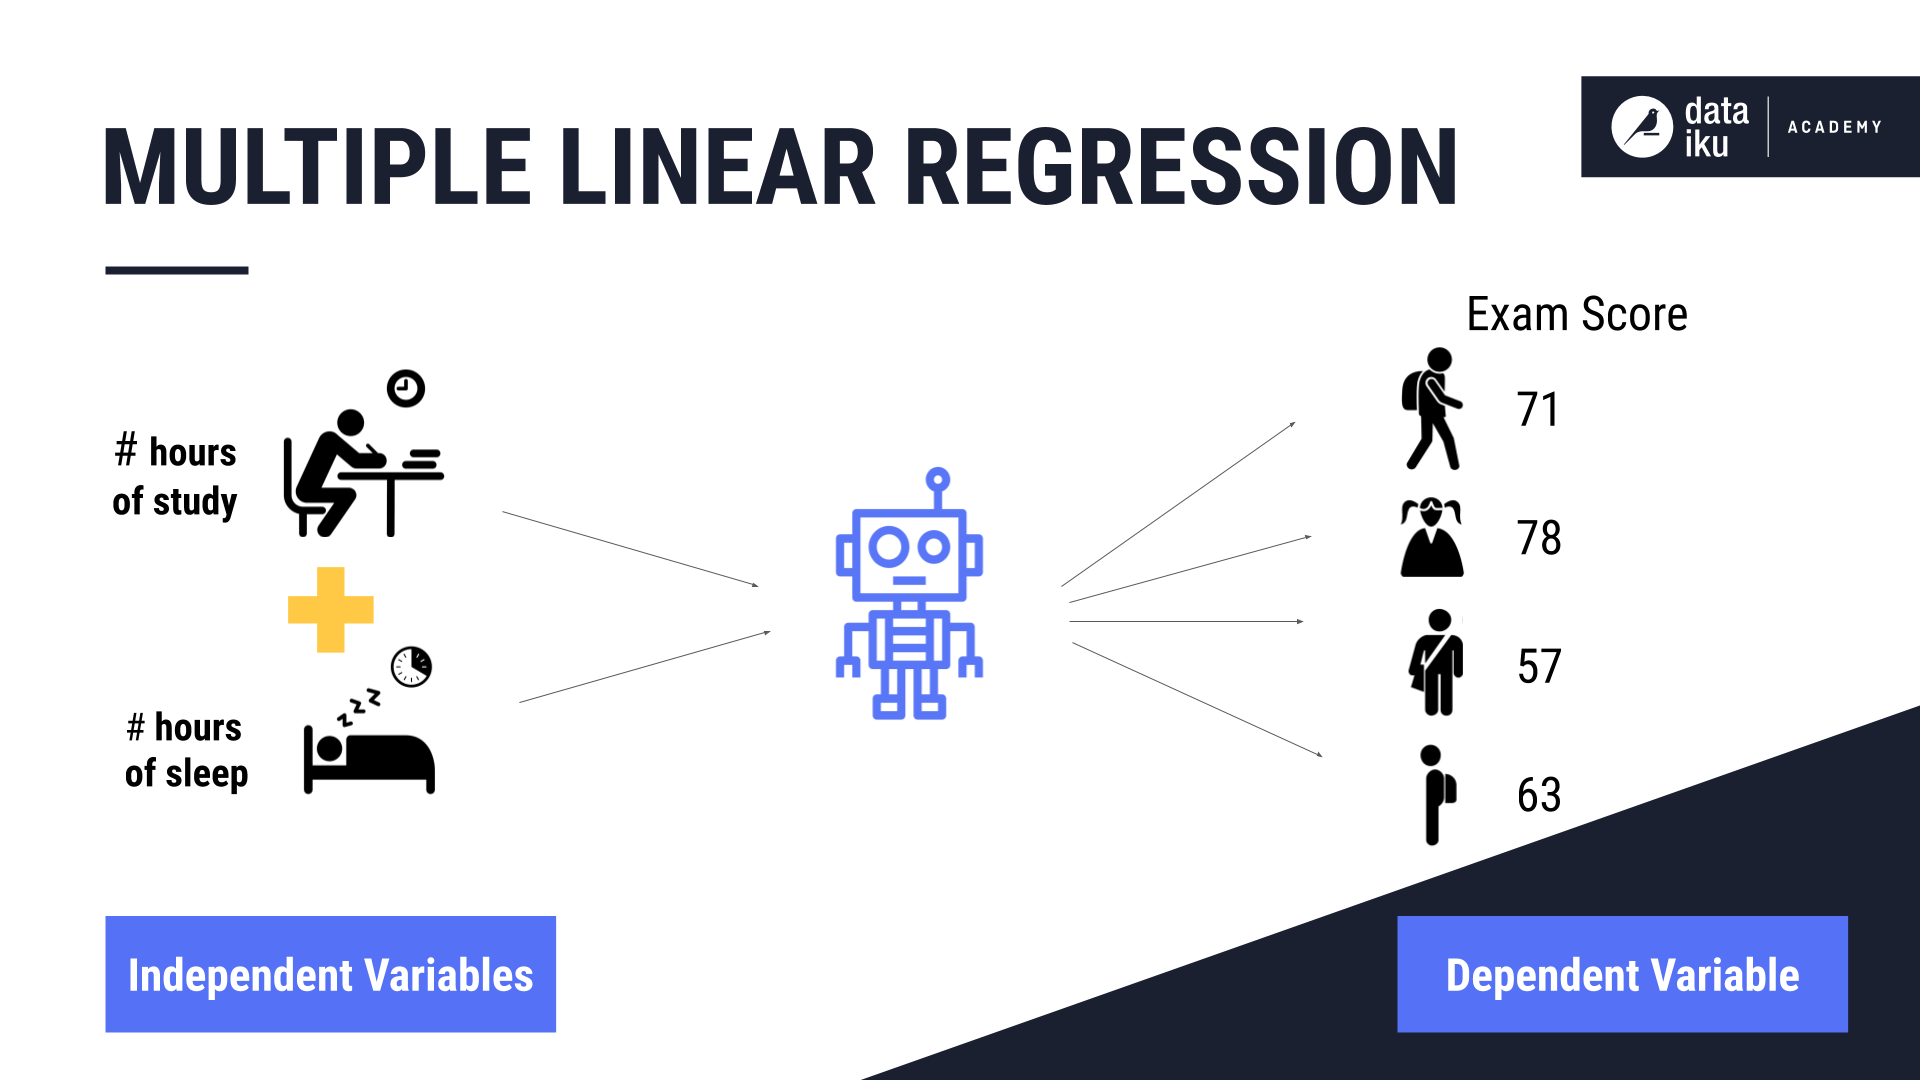 ../../_images/multiple-linear-regression.png